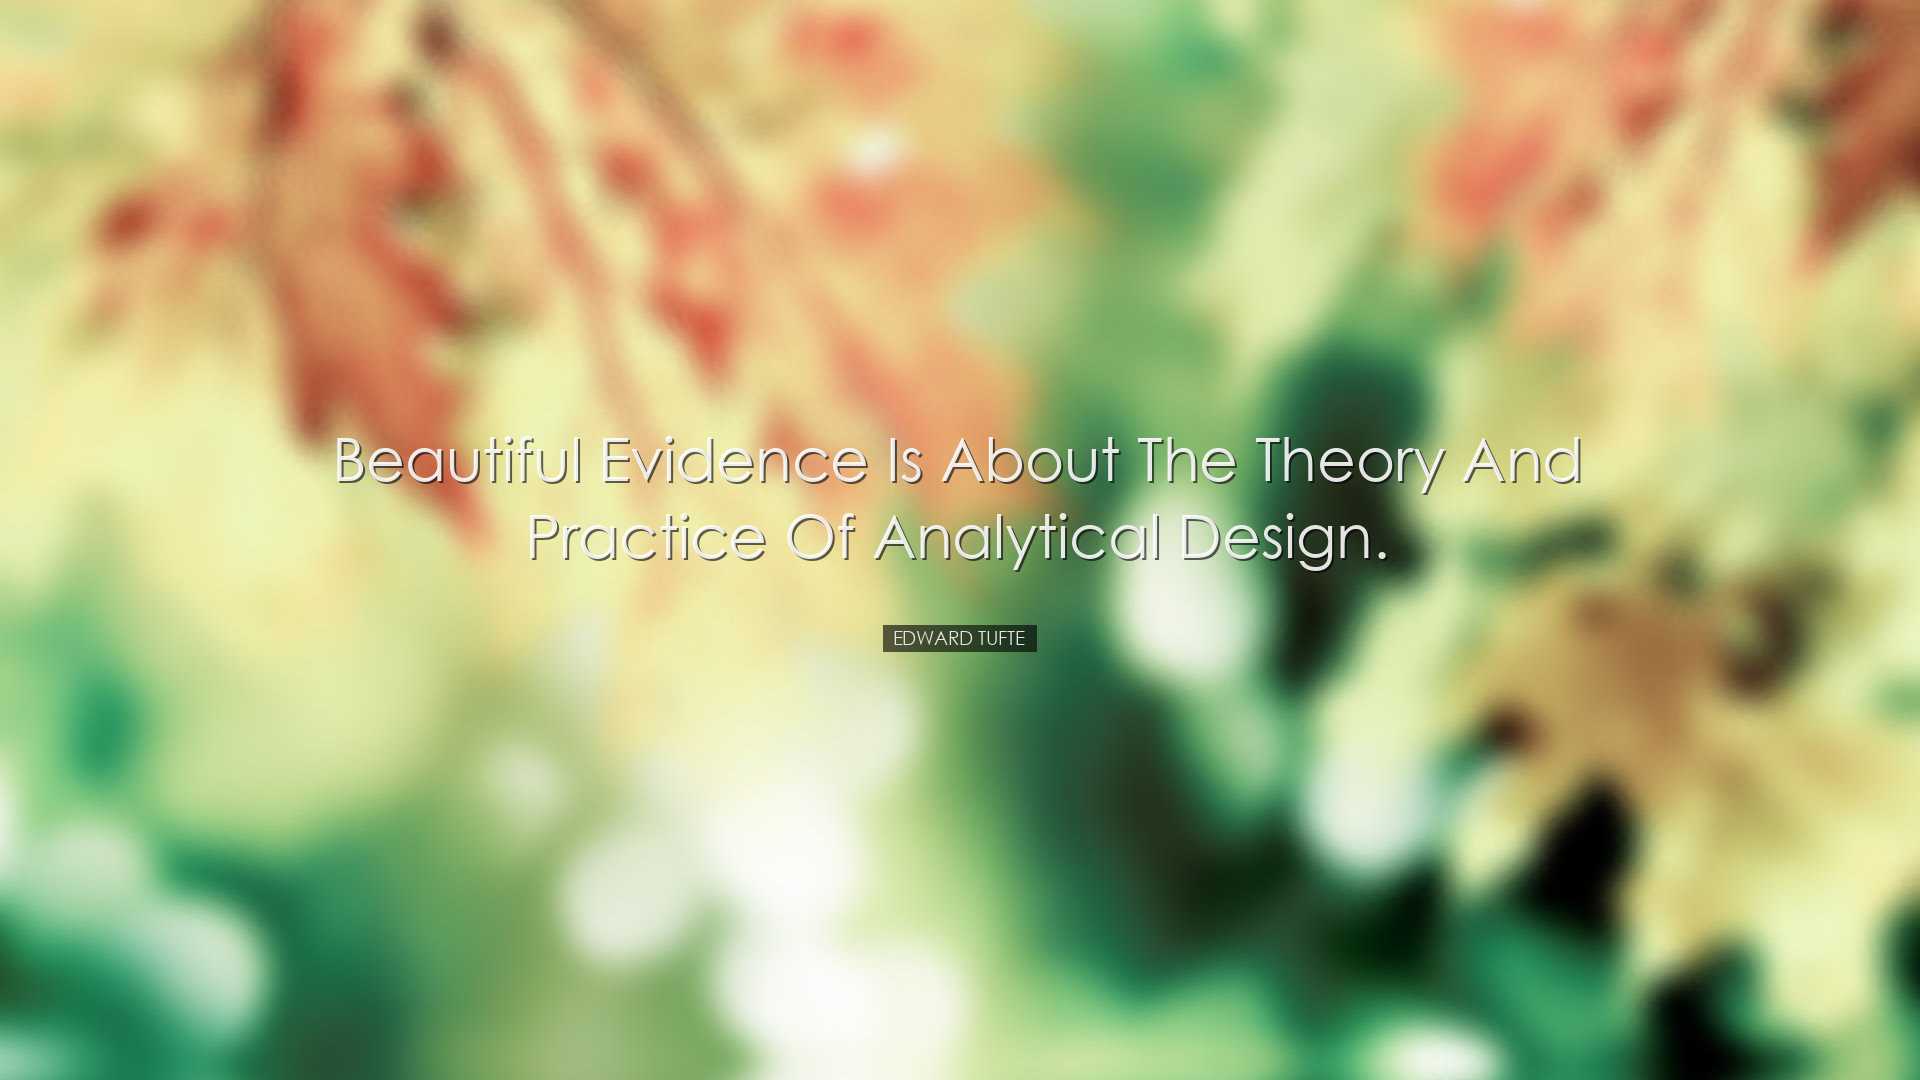 Beautiful Evidence is about the theory and practice of analytical